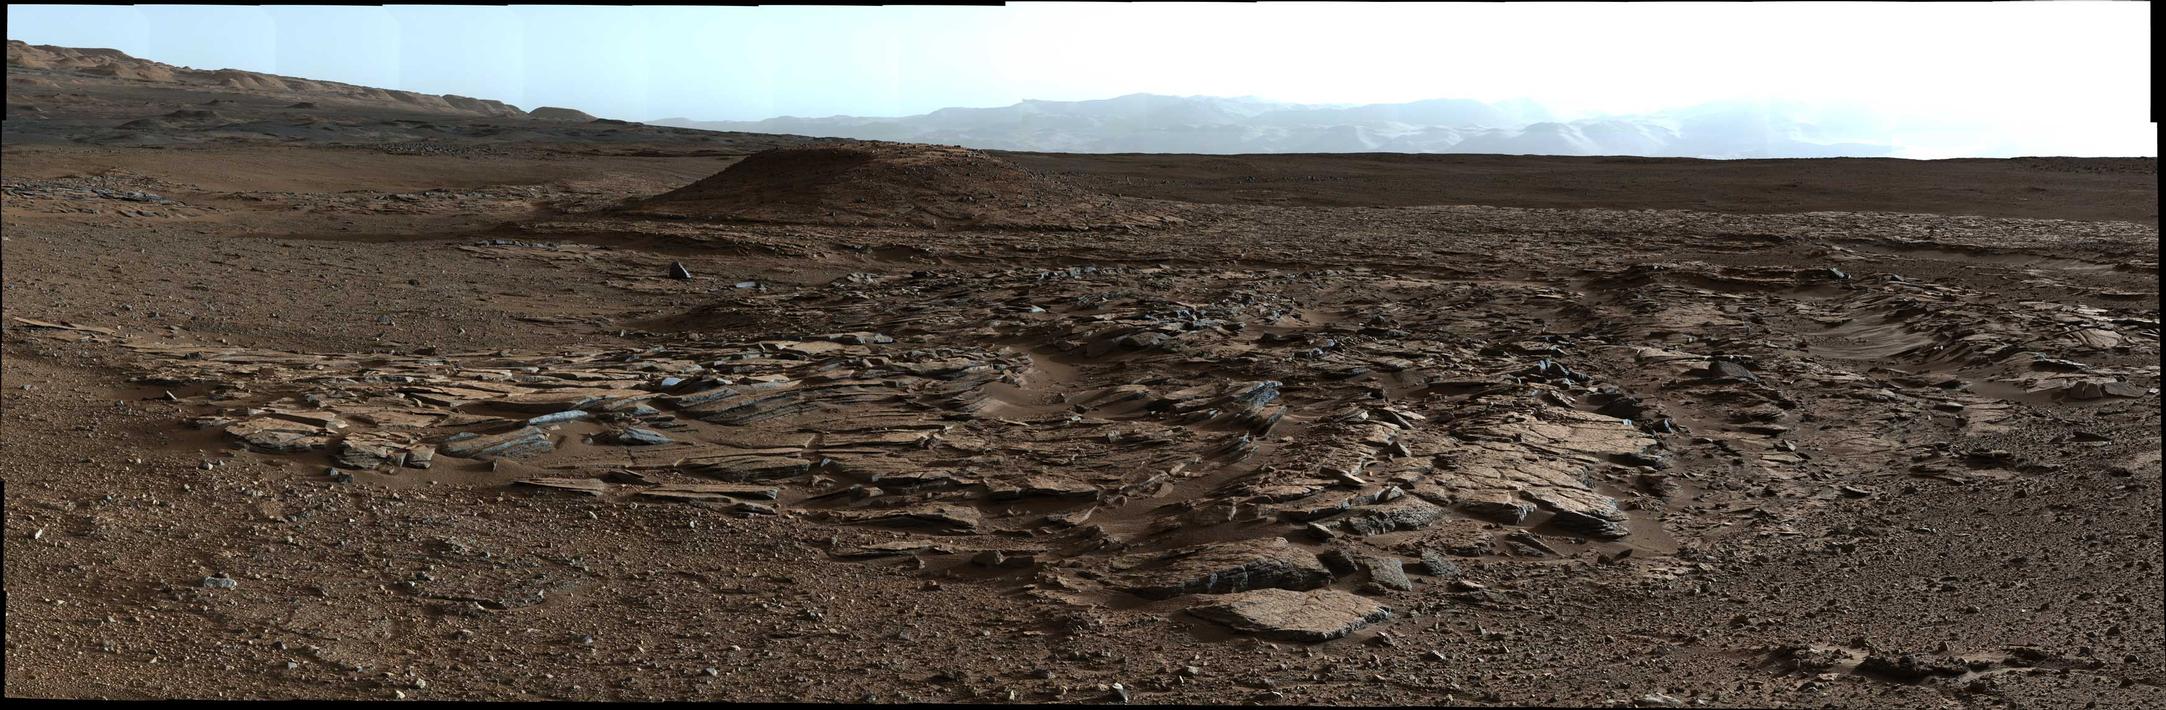 This April 4, 2014, image from Curiosity's Mastcam looks to the west of a waypoint on the rover's route to Mount Sharp. The mountain lies to the left of the scene. The image shows sets of sandstone beds inclined to the south (left), indicating progressive build-out of sediment toward Mount Sharp.